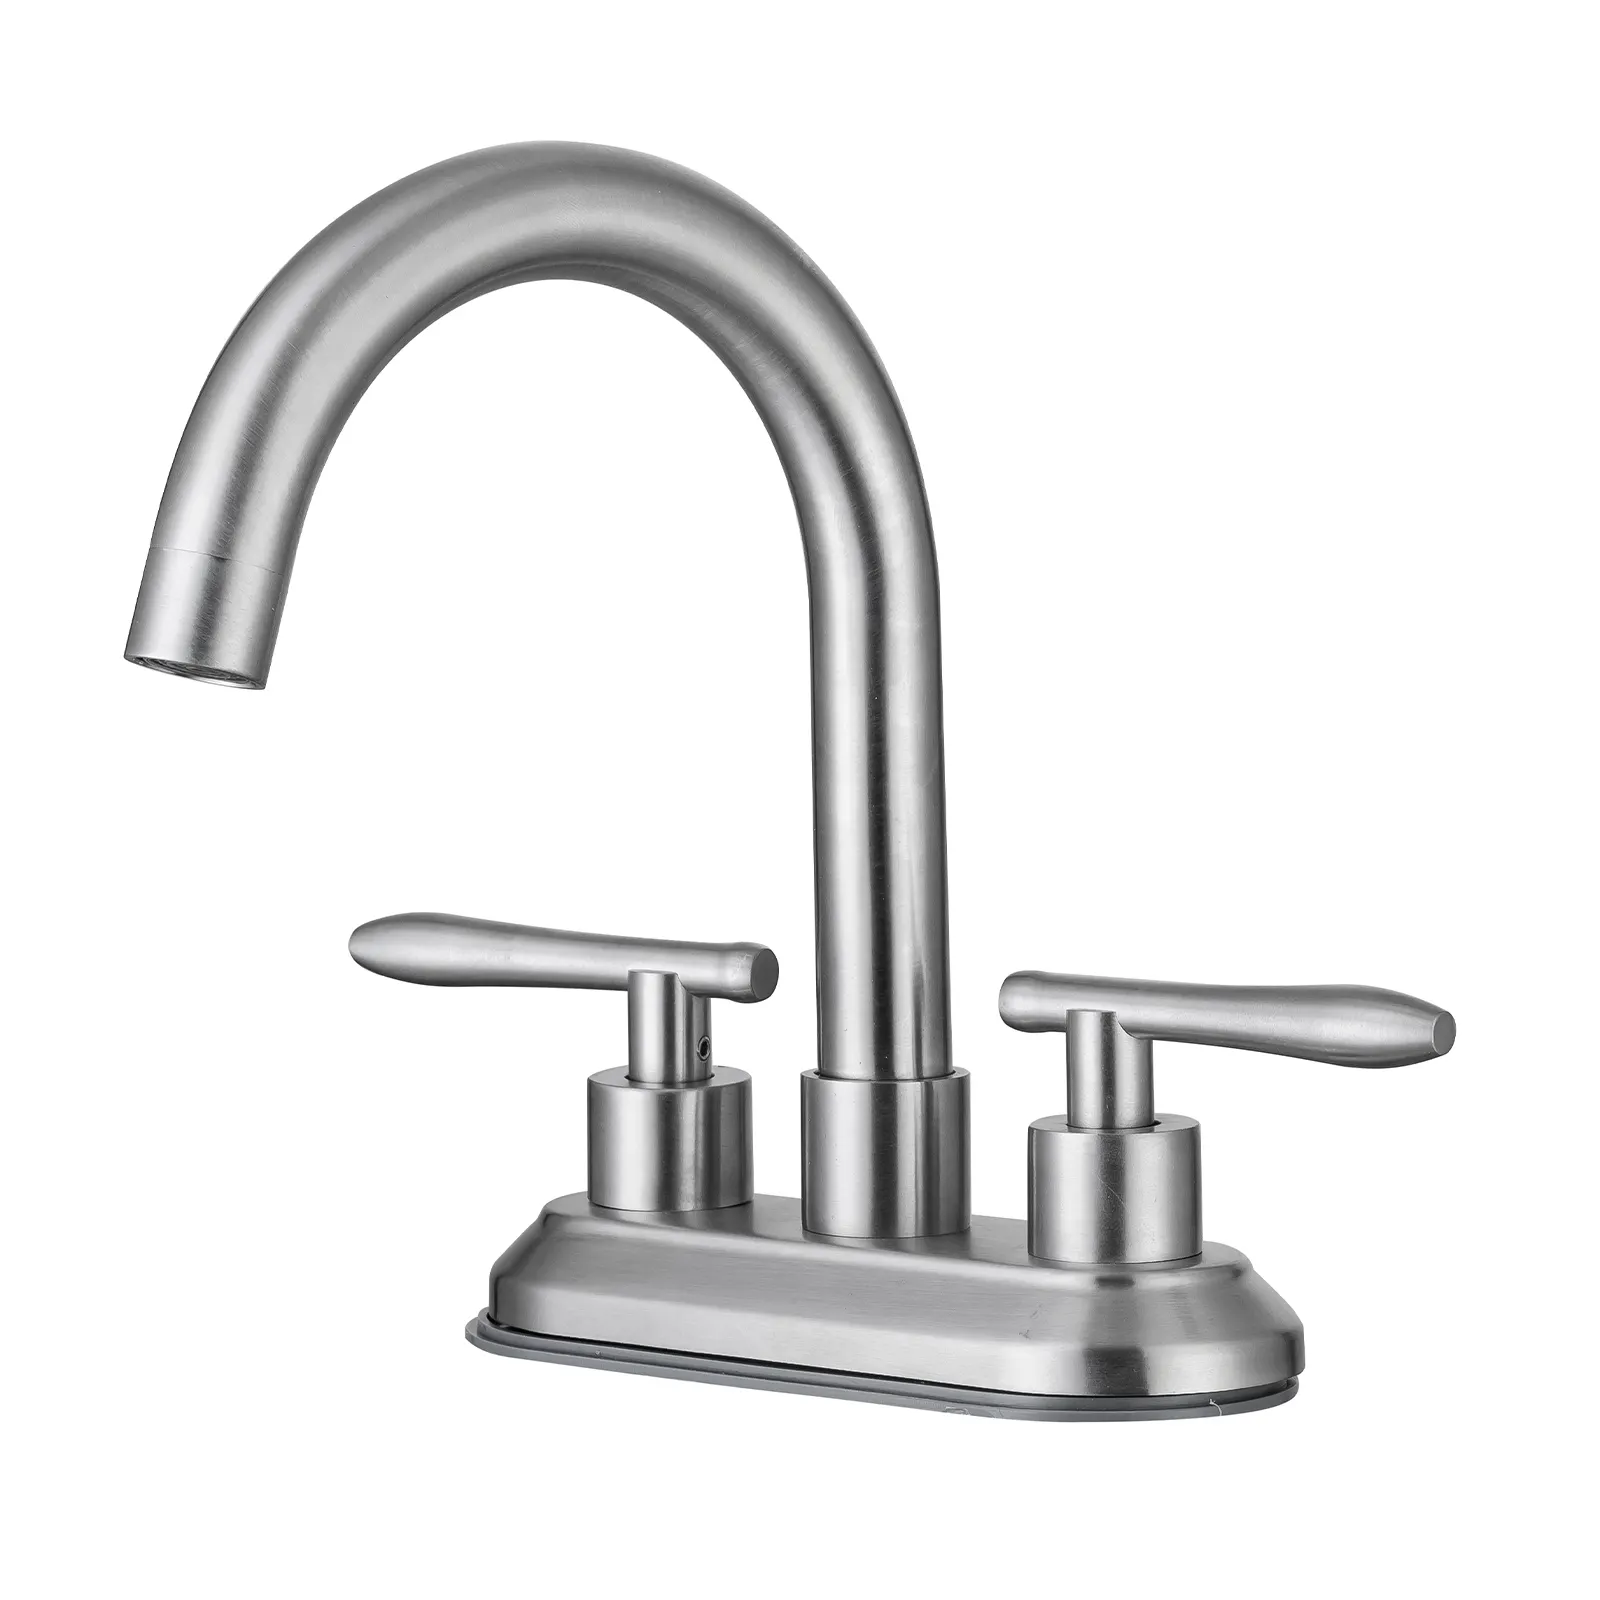 Modern Hybrid Waterway 304 stainless steel Lever Two Handle Bathroom Mixer Basin Faucet